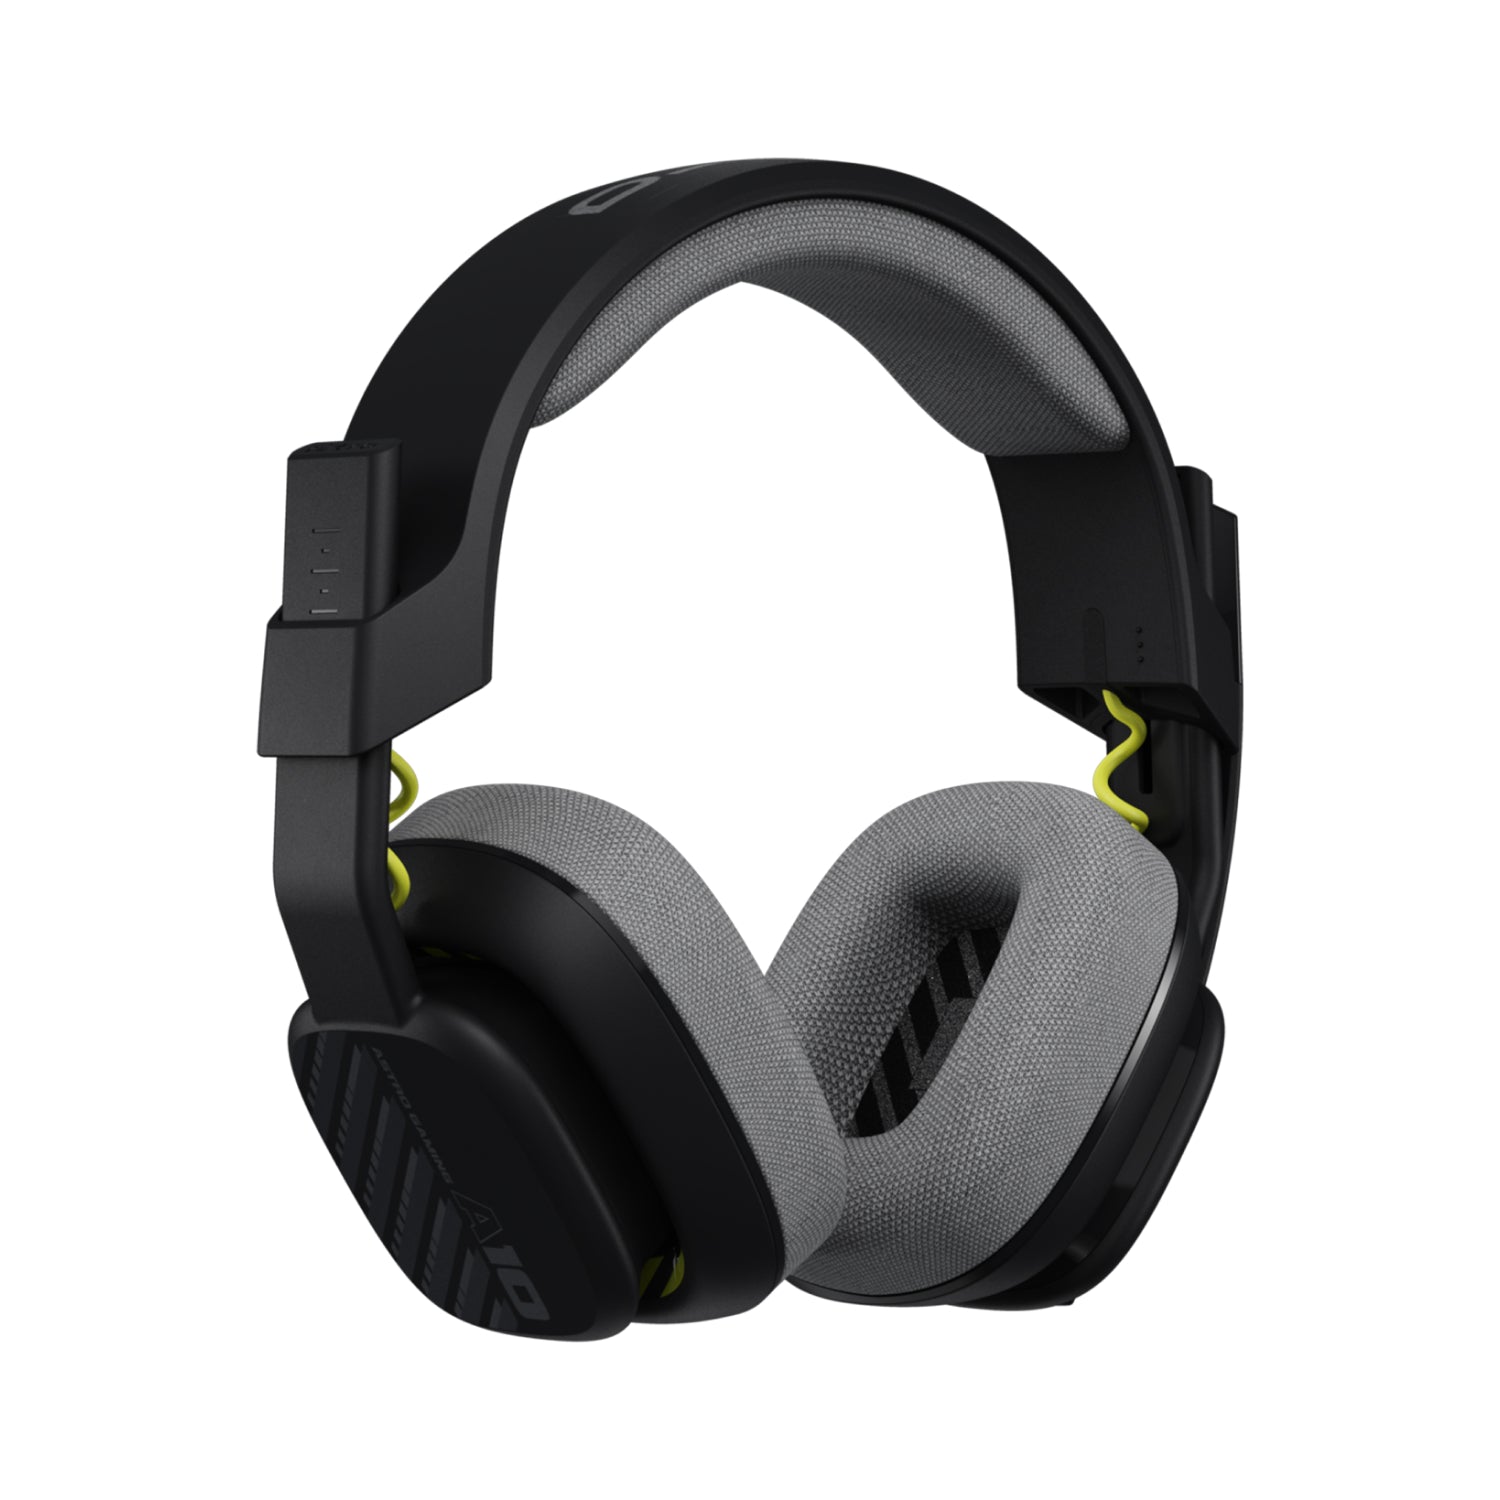 Astro A10 Gaming Headset Gen 2 - Xbox/PC - Black